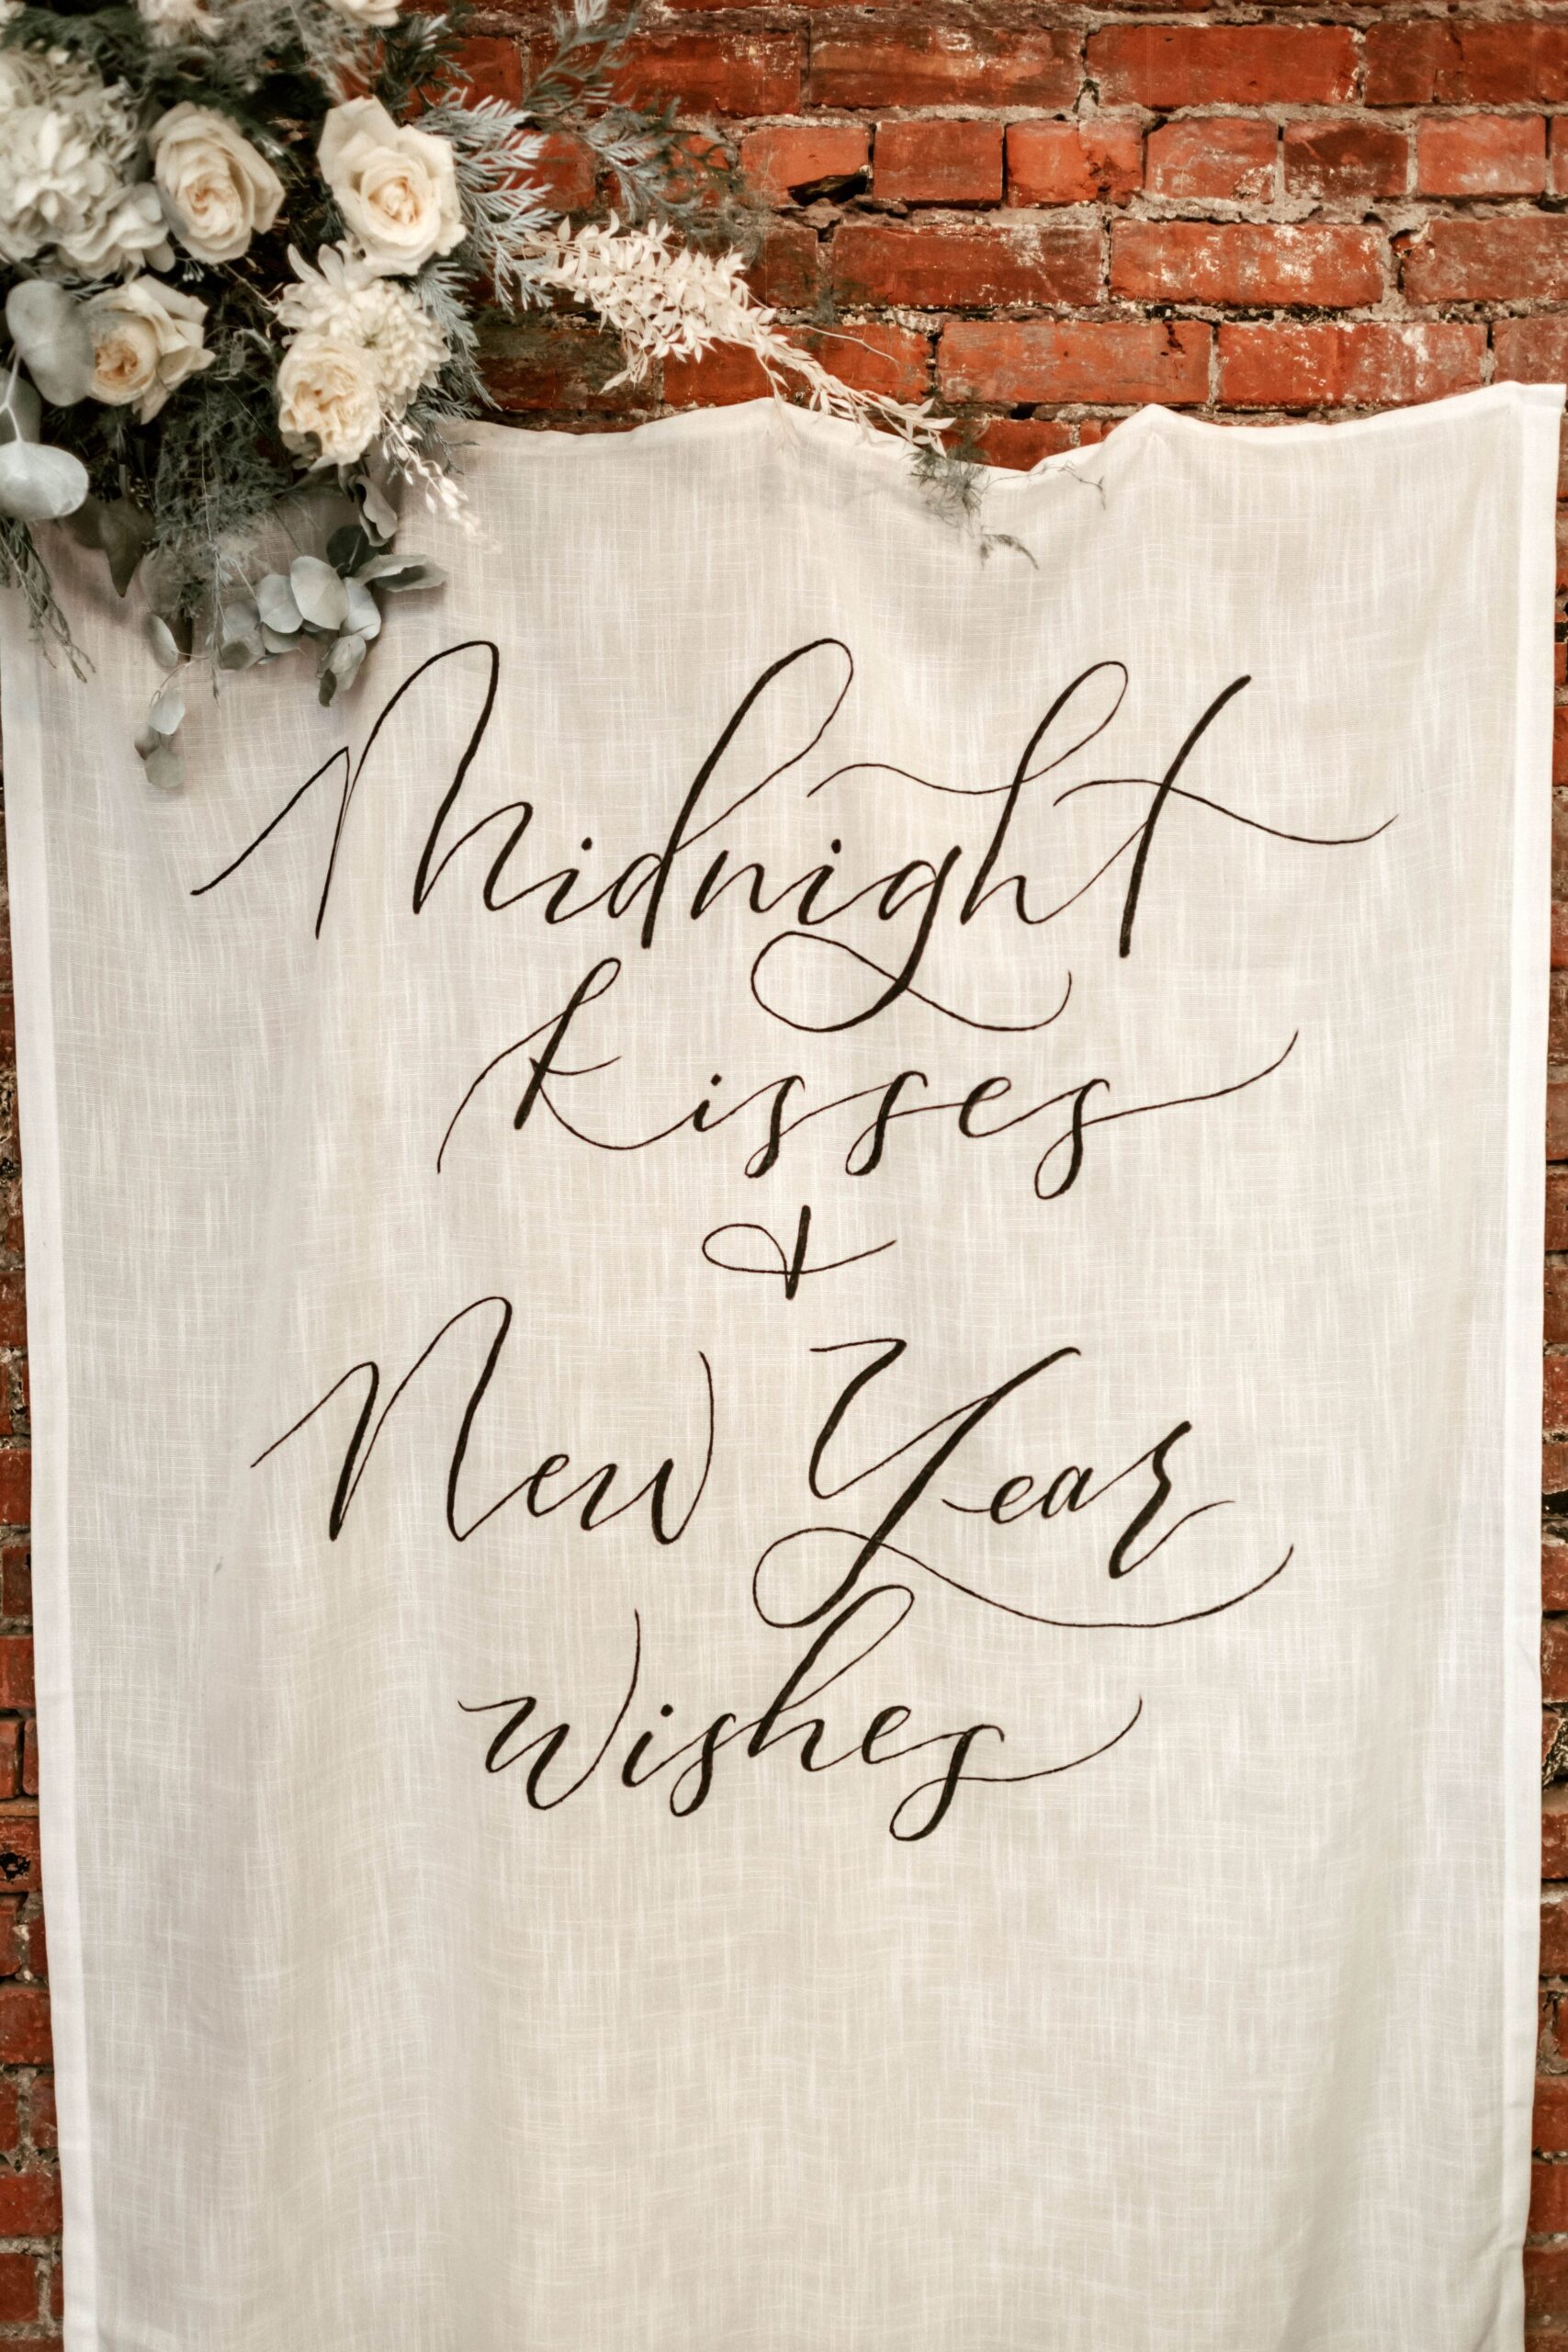  custom calligraphy banner saying midnight kisses and New Years wishes 